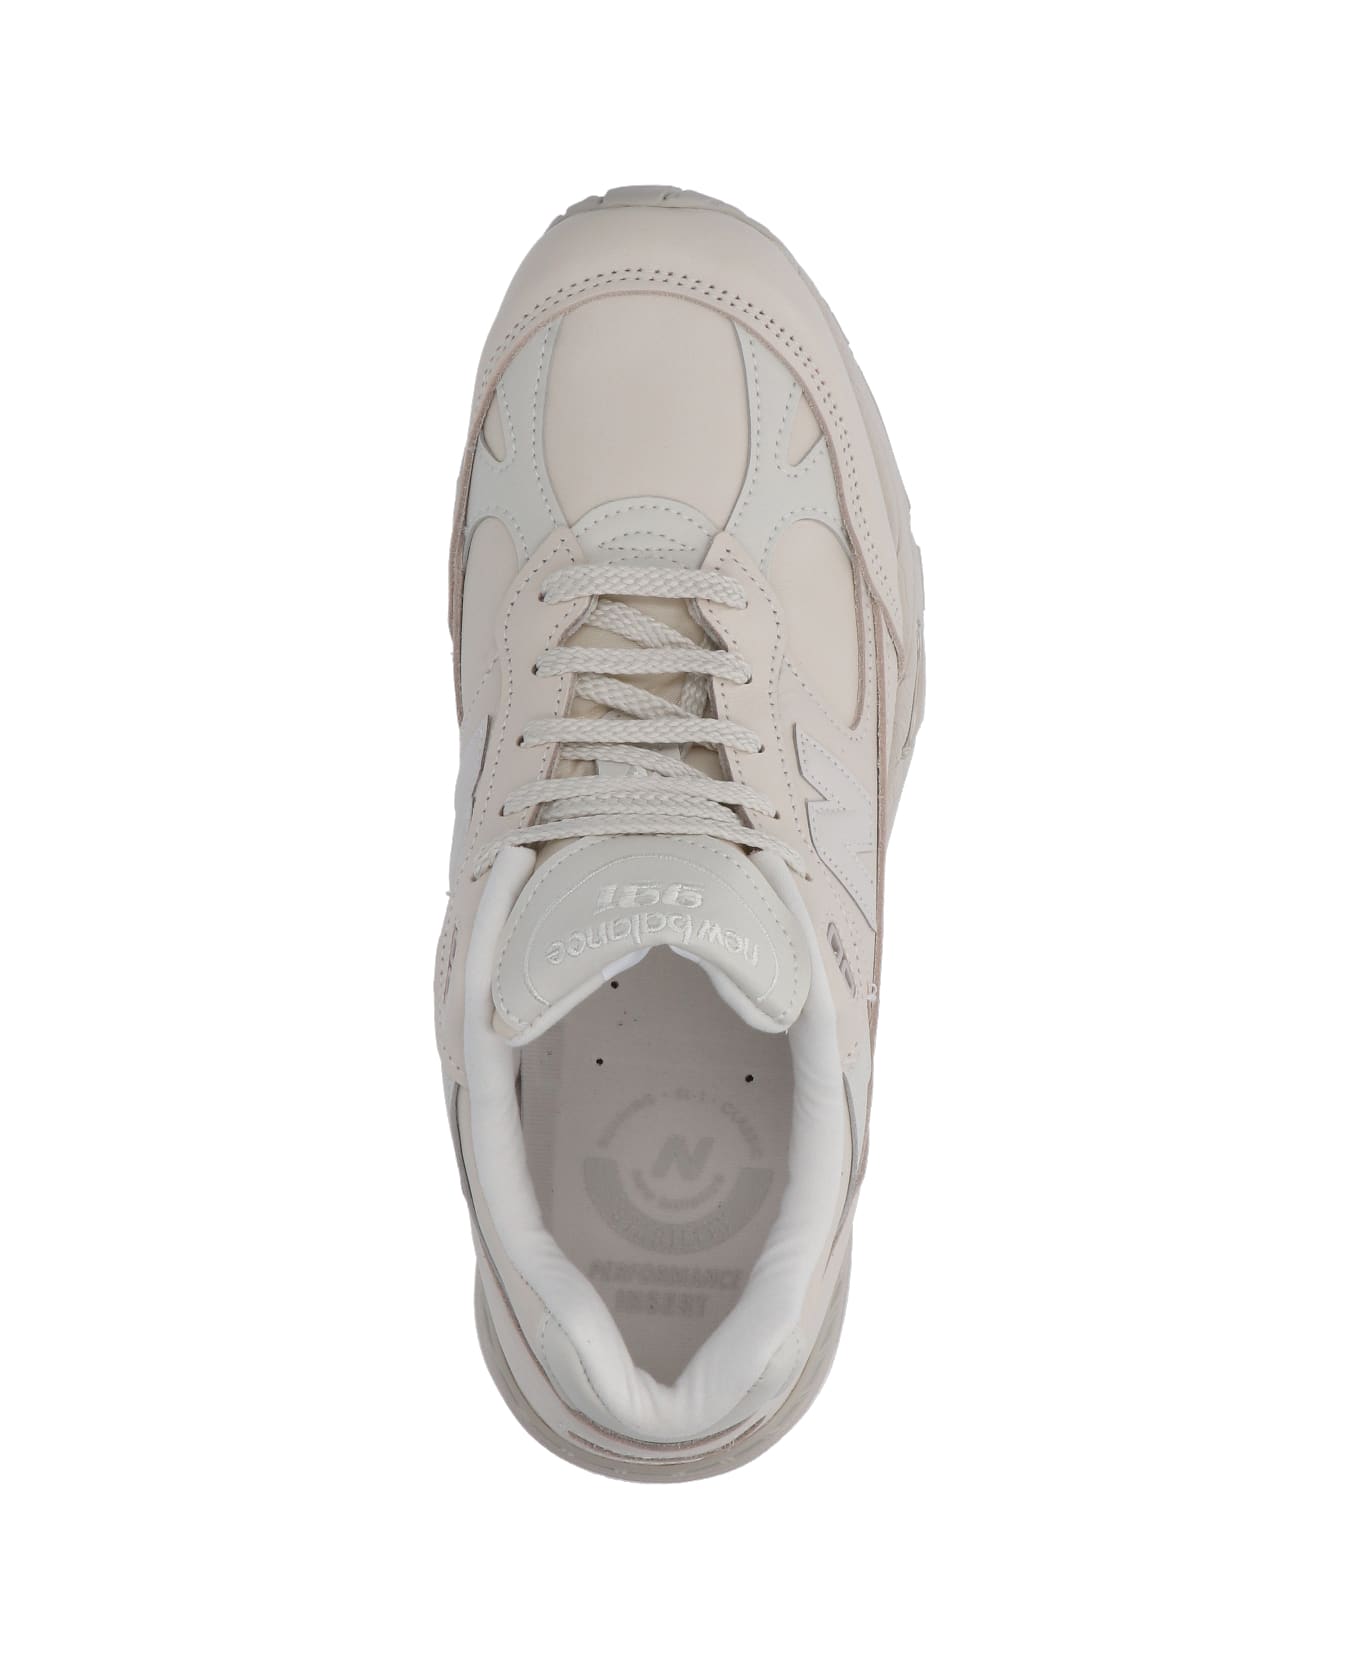 New Balance 'made In Uk 991v1' Sneakers - White